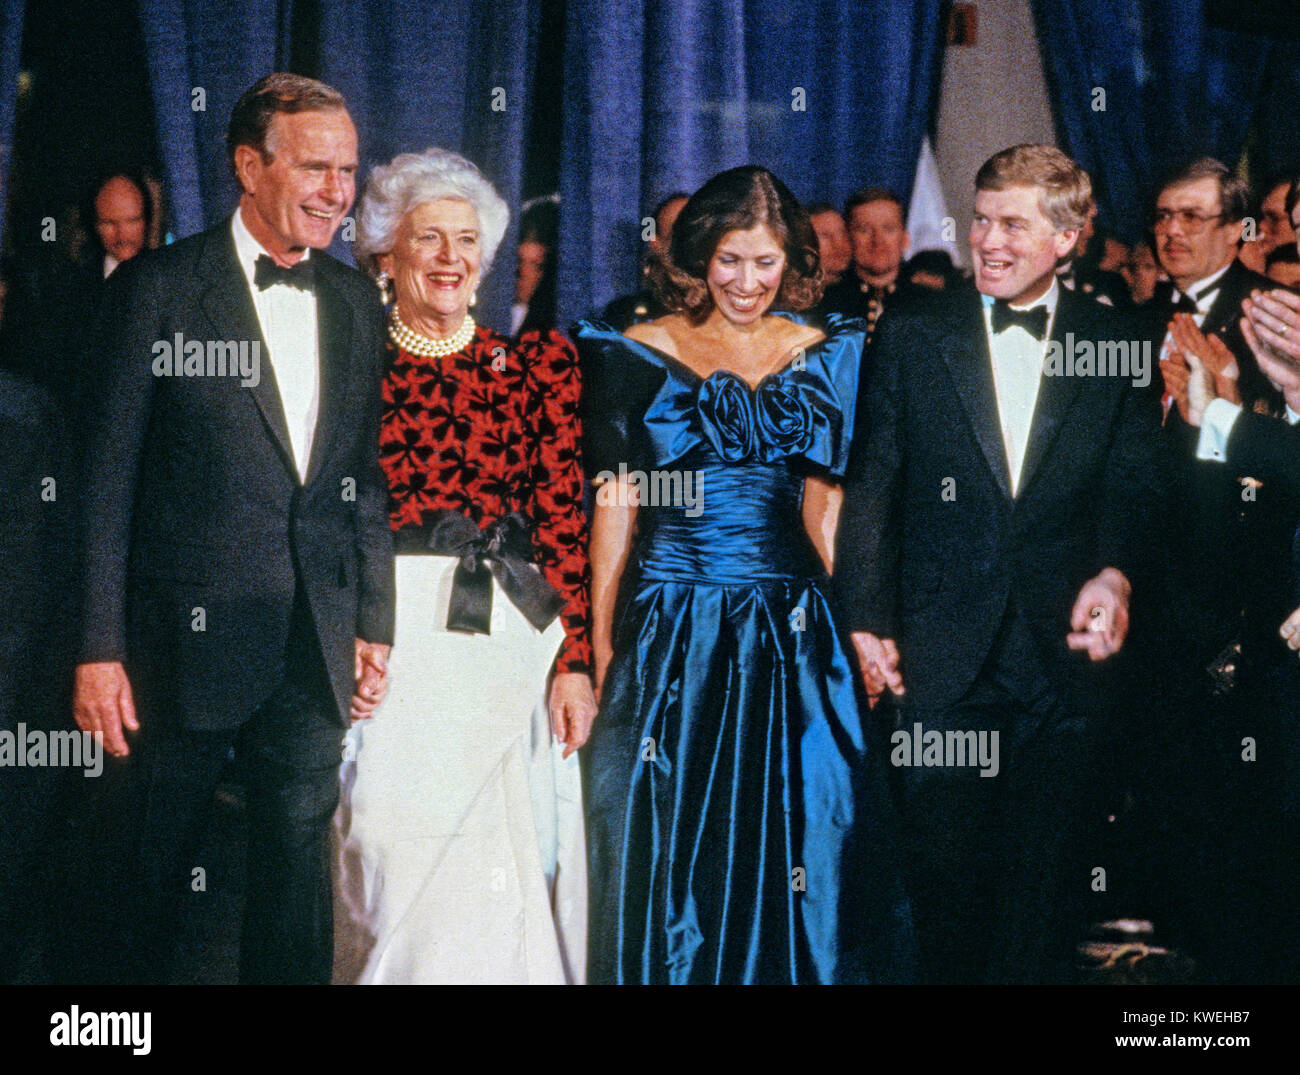 From left to right: United States President-elect George H.W. Bush, Barbara Bush, Marilyn Quayle, and US Vice President-elect Dan Quayle, attends the Inaugural Gala at the Washington DC Convention Center in Washington, DC on January 18 1989.    Credit: David Burnett / Pool via CNP /MediaPunch Stock Photo